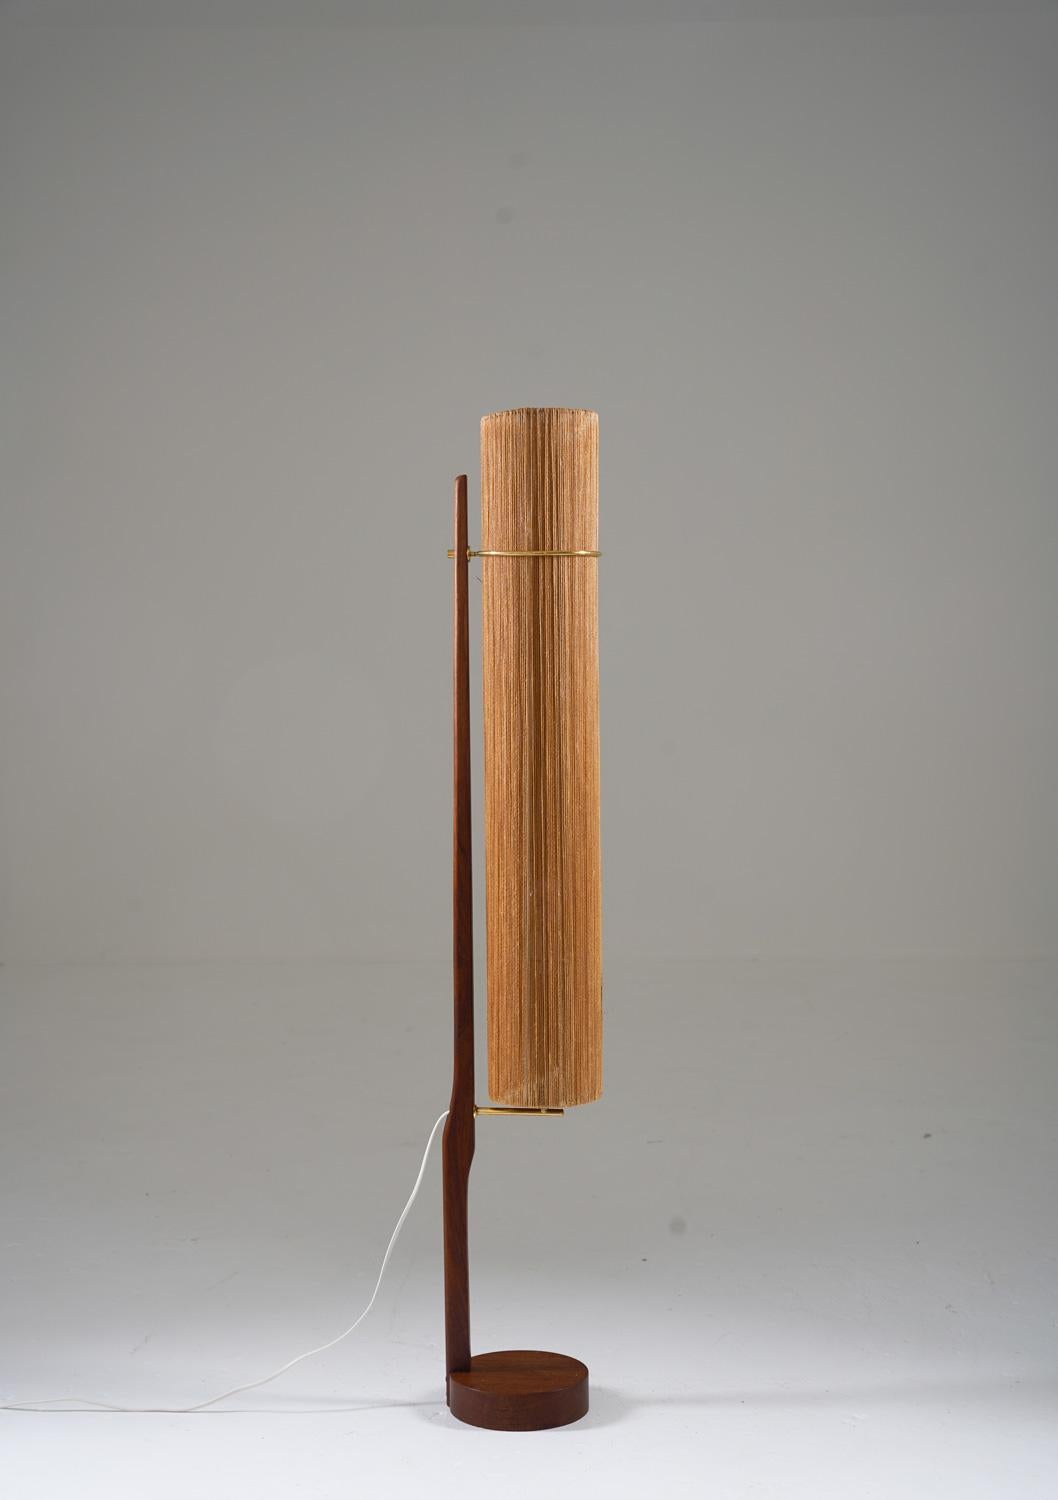 Scandinavian midcentury floor lamp in teak and brass, by Ib Fabiansen for Fog & Mørup, Denmark
This lamp consists of a teak base with brass details, supporting the large cylinder-shaped shade.

Condition: Very good original condition.